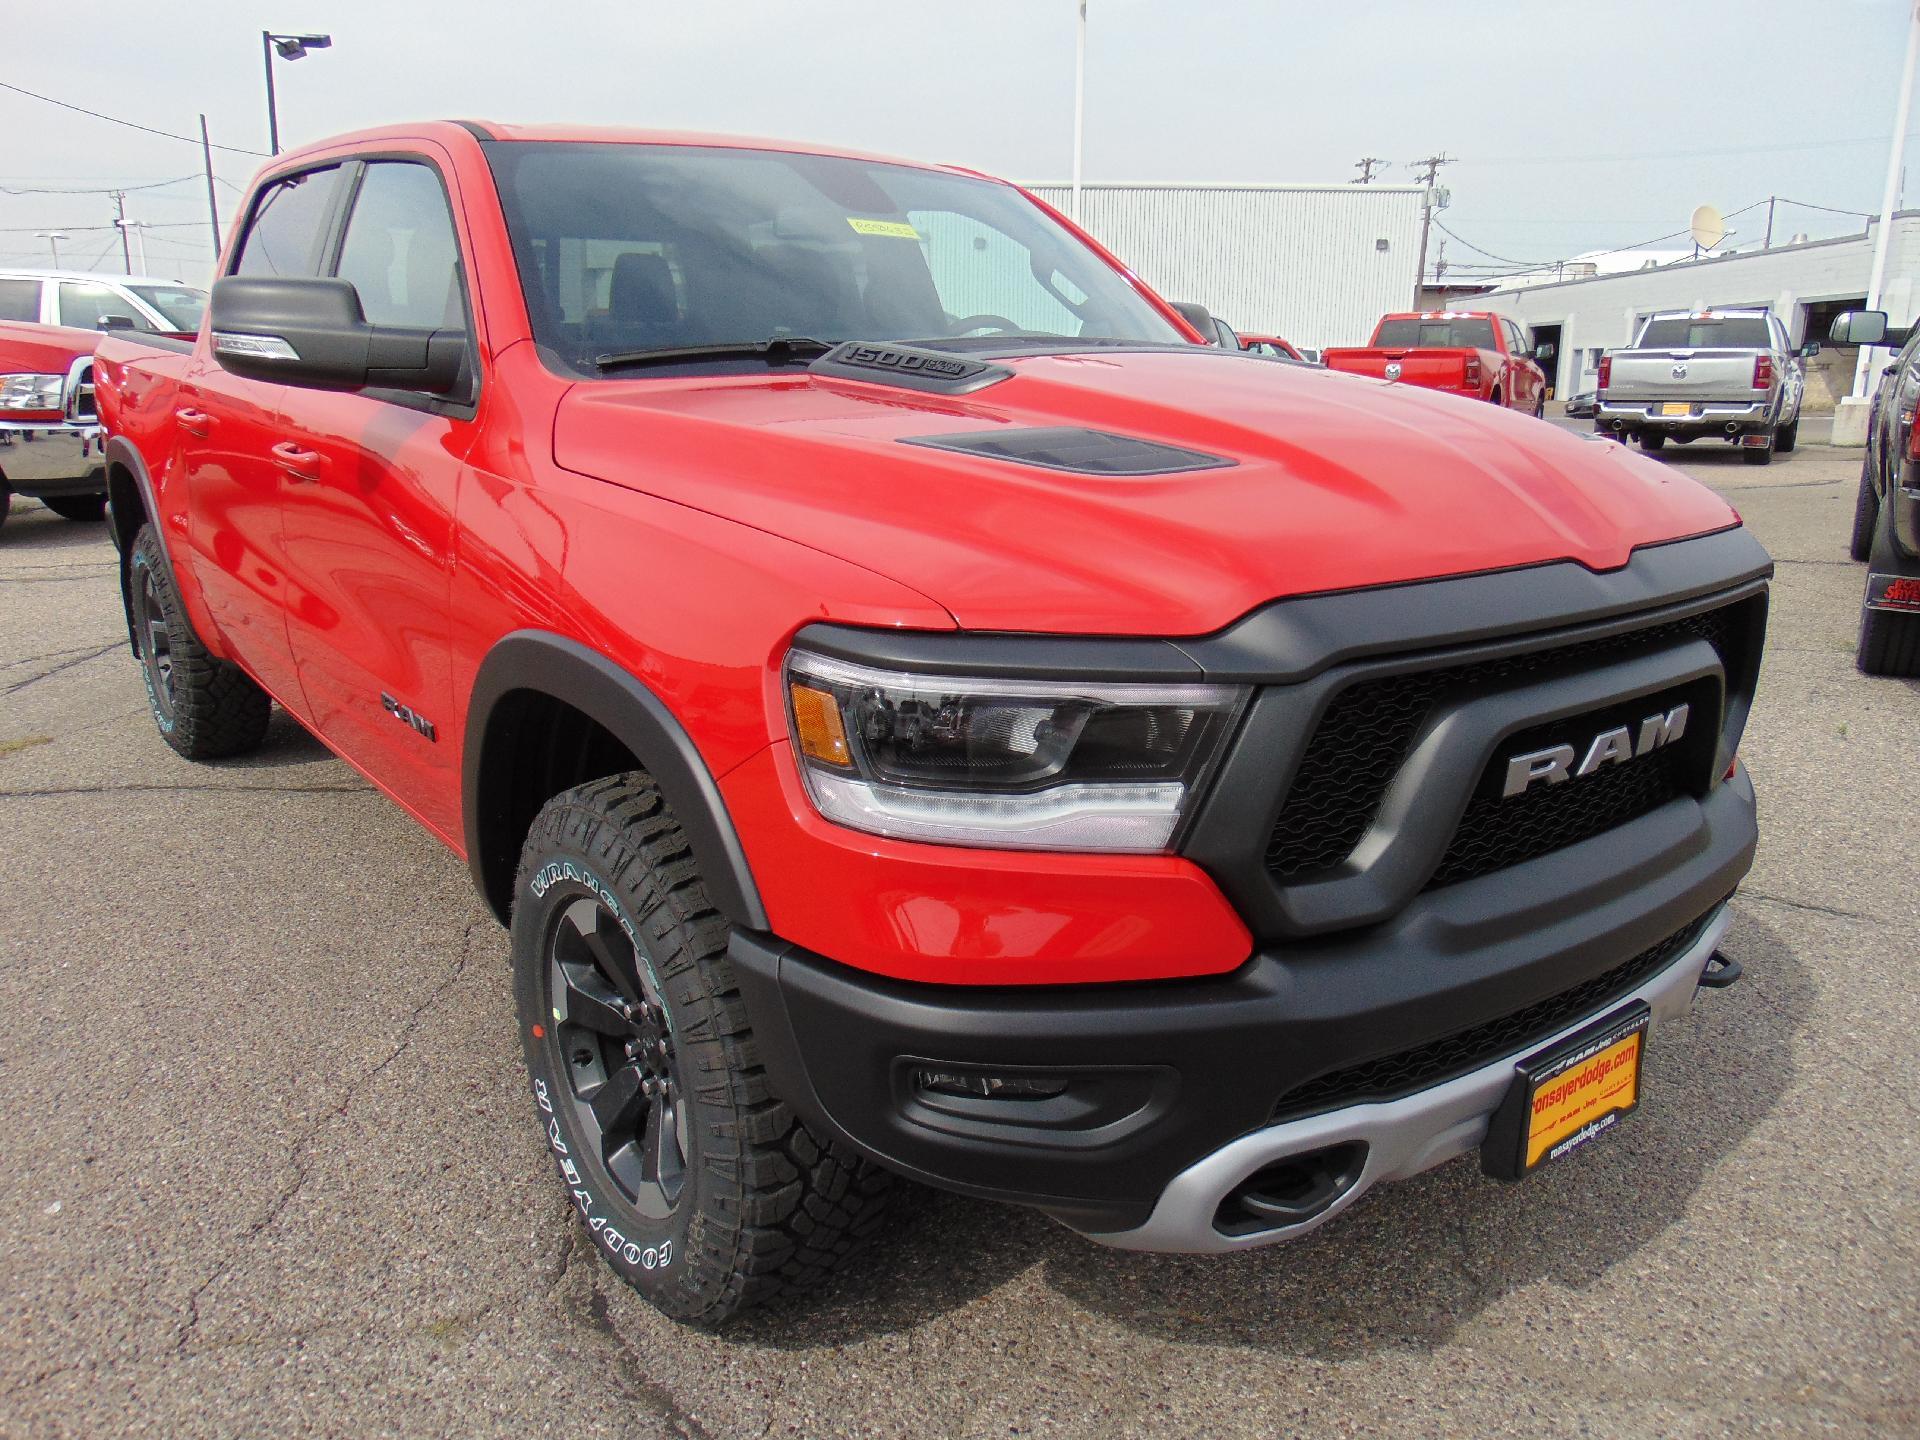 2019 ram rebel with rambox for sale